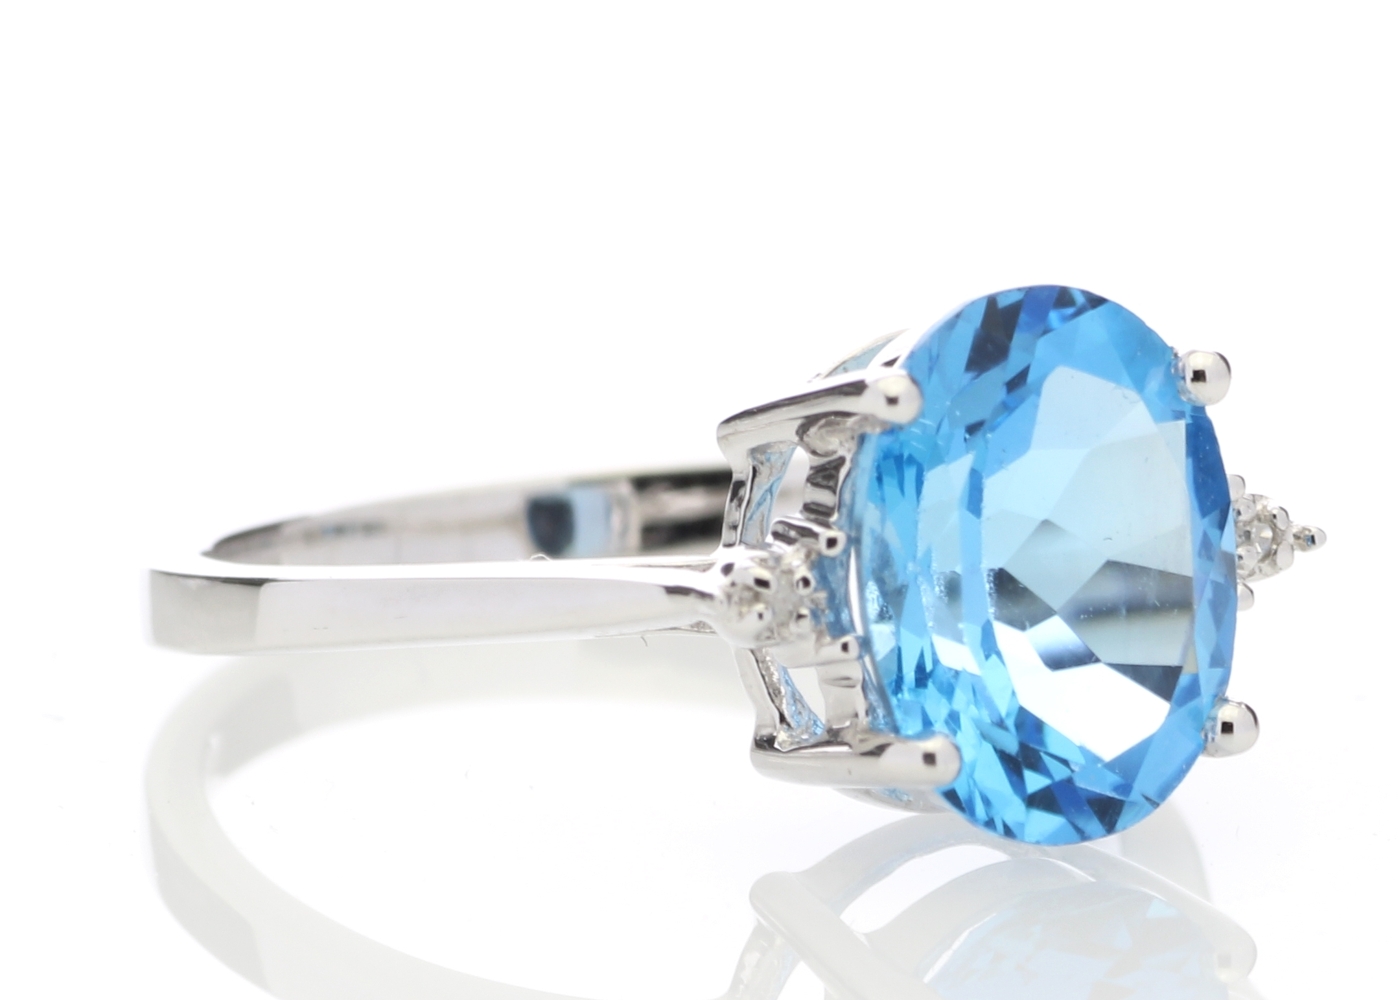 9ct White Gold Diamond And Blue Topaz Ring - Image 4 of 6